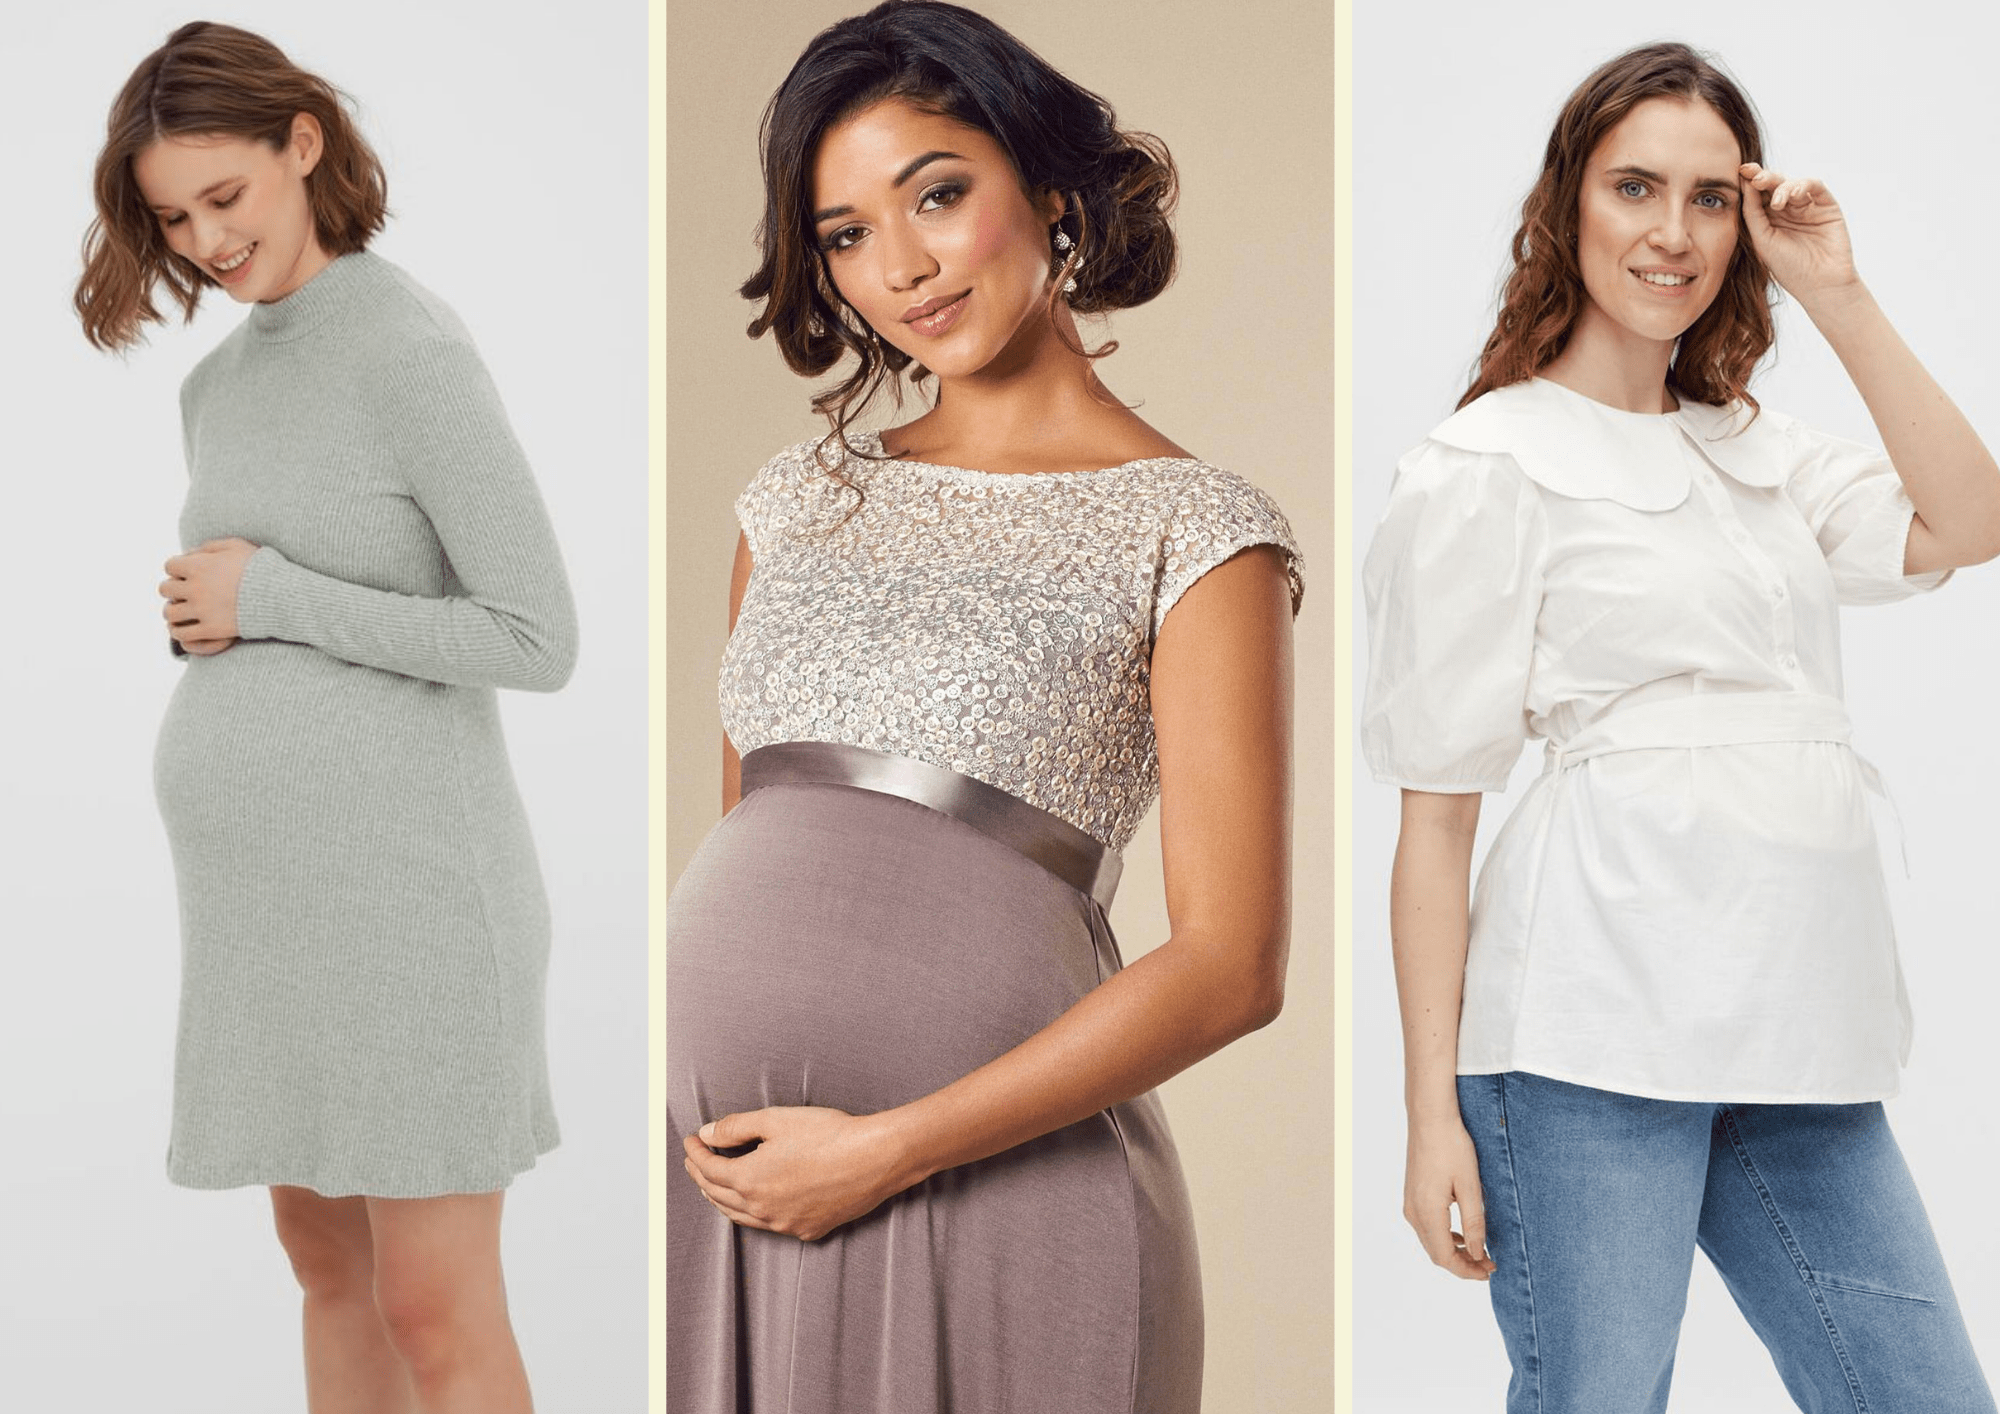 Eco Friendly Maternity Clothes: Where To Source Your Style In The